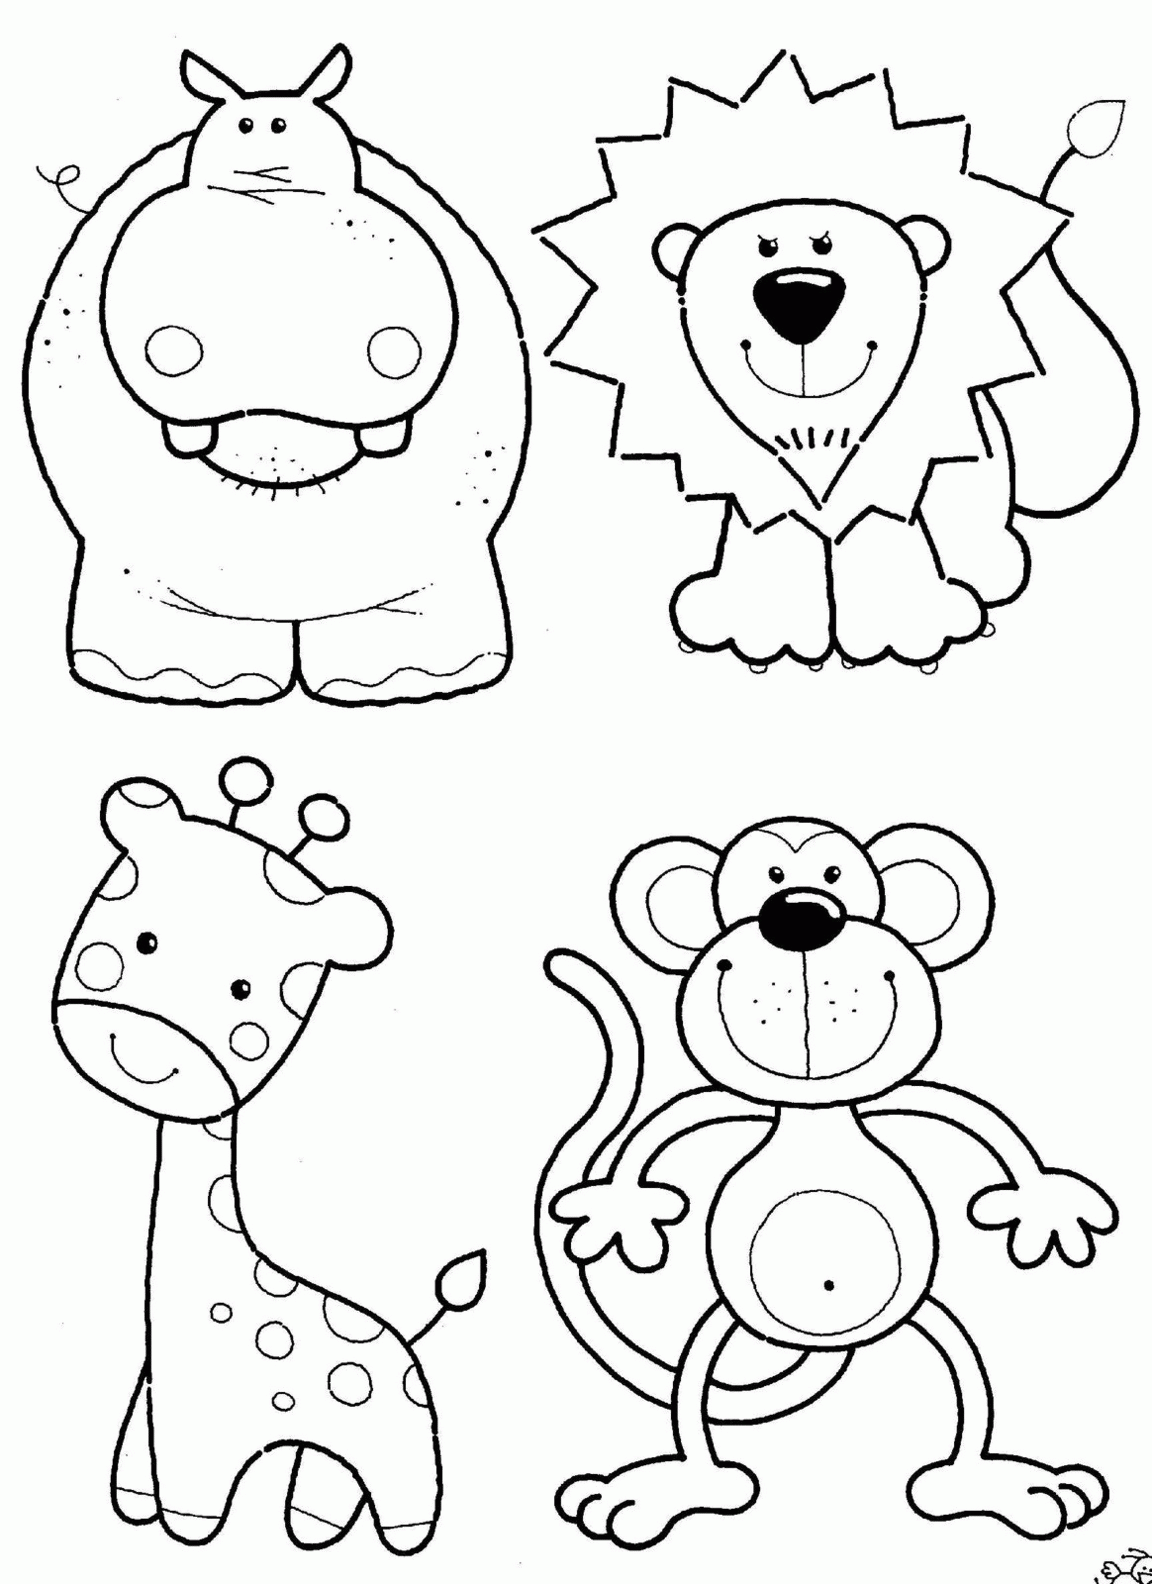 Baby Farm Animal Coloring Pages Smlf. 20 Jungle Animals. Leapfrog ...